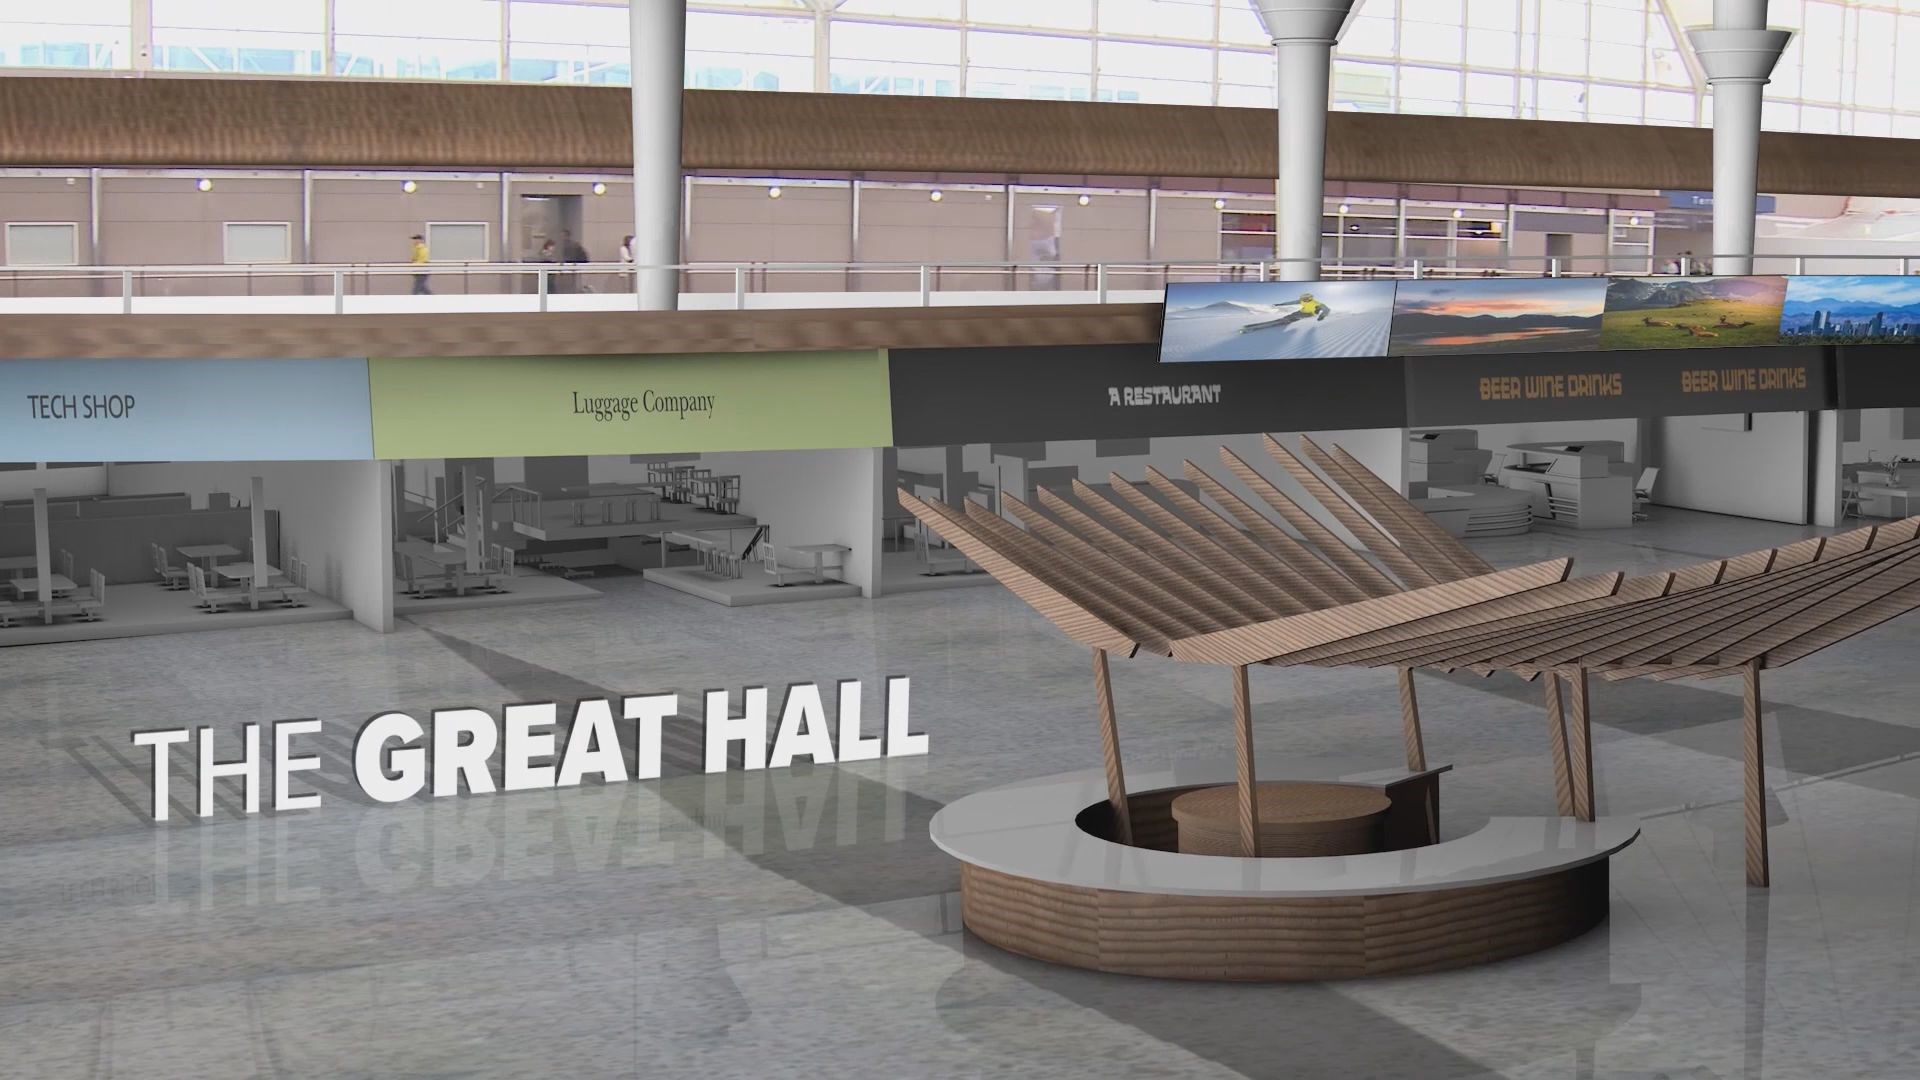 Extensive renovations are taking place at DIA. Here's a look at what the Great Hall will look like once the work is done.